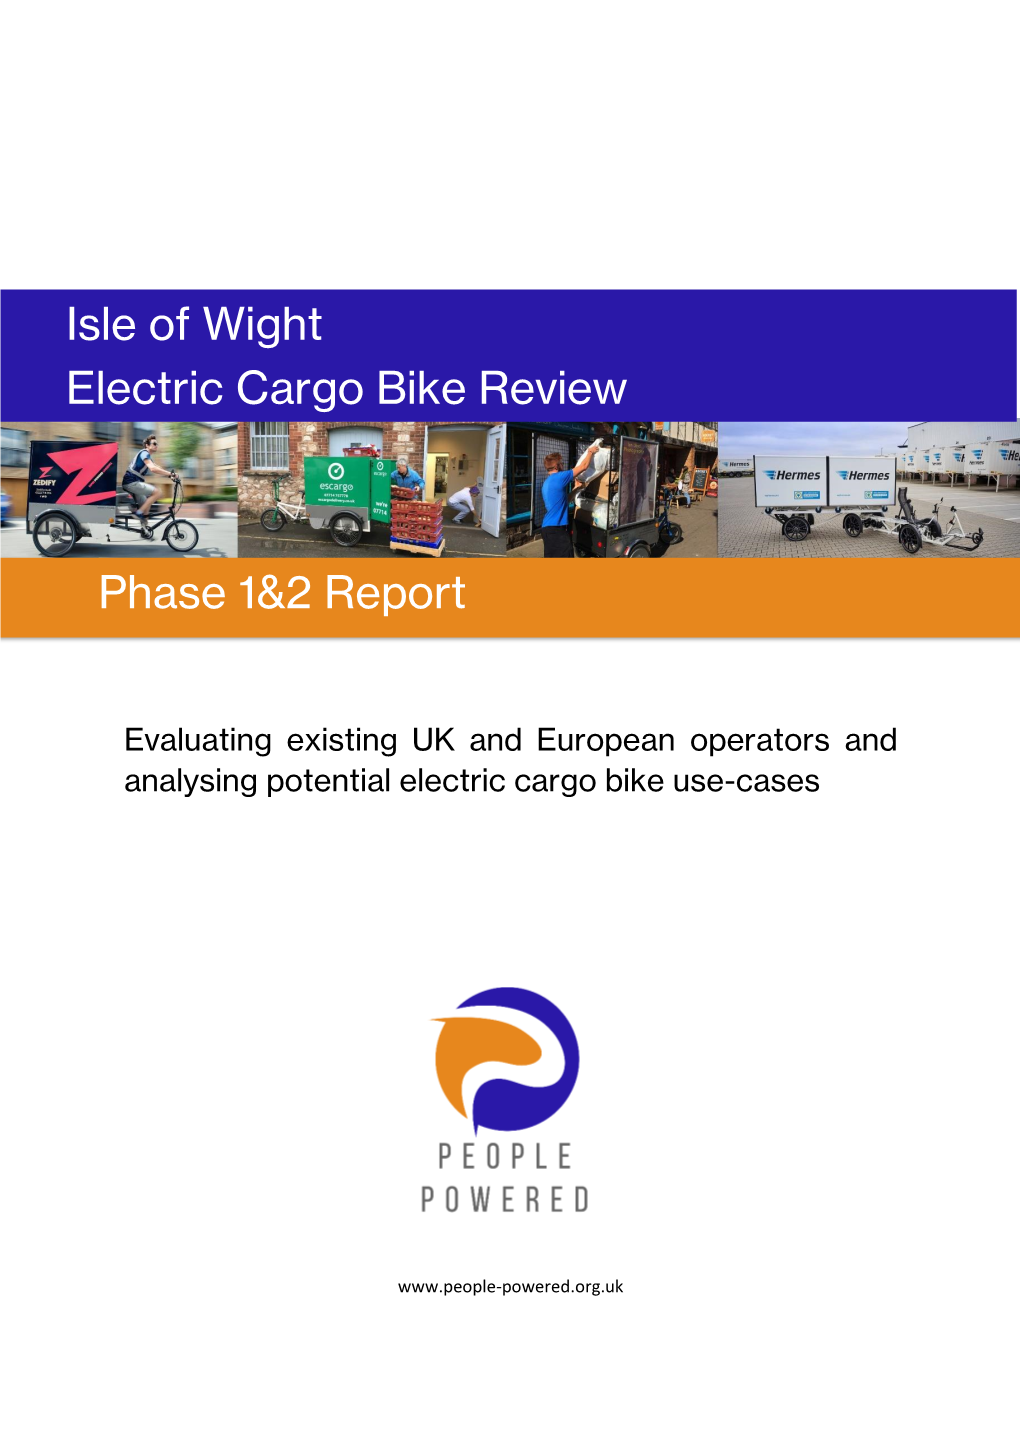 Isle of Wight Electric Cargo Bike Review